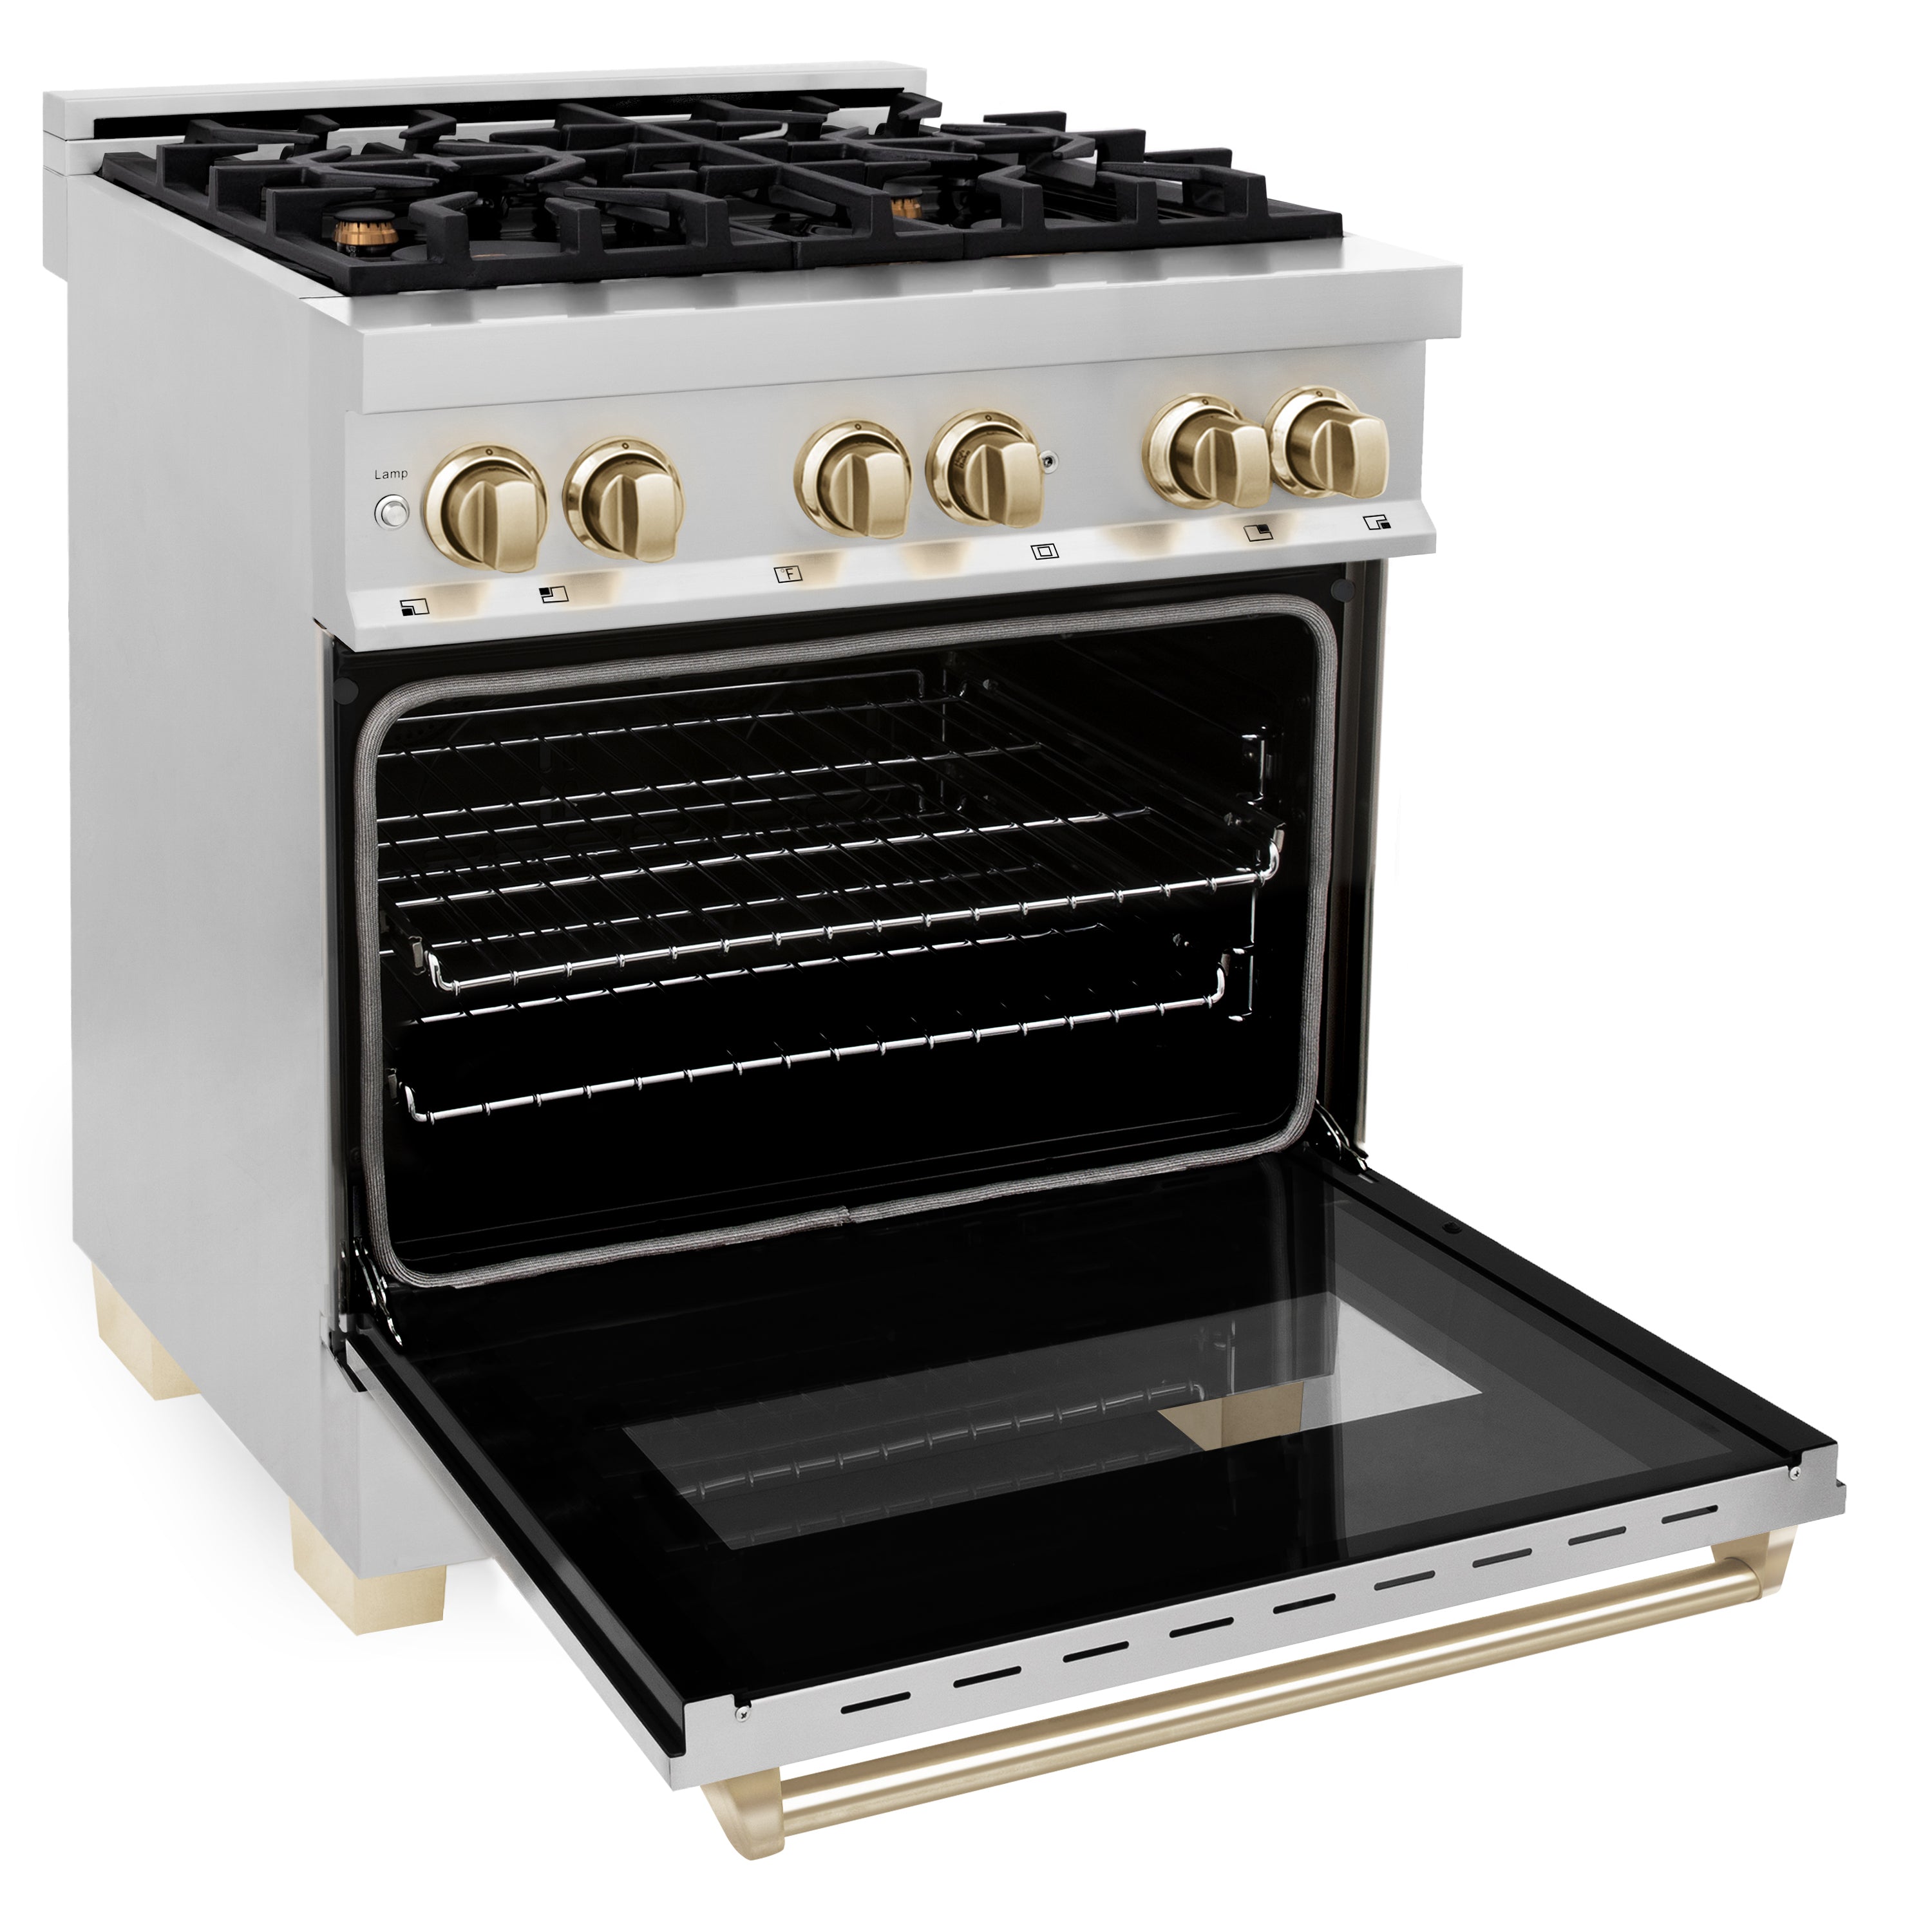 ZLINE Autograph Edition 30" 4.0 cu. ft. Dual Fuel Range with Gas Stove and Electric Oven in Stainless Steel with Accents (RAZ-30) - New Star Living